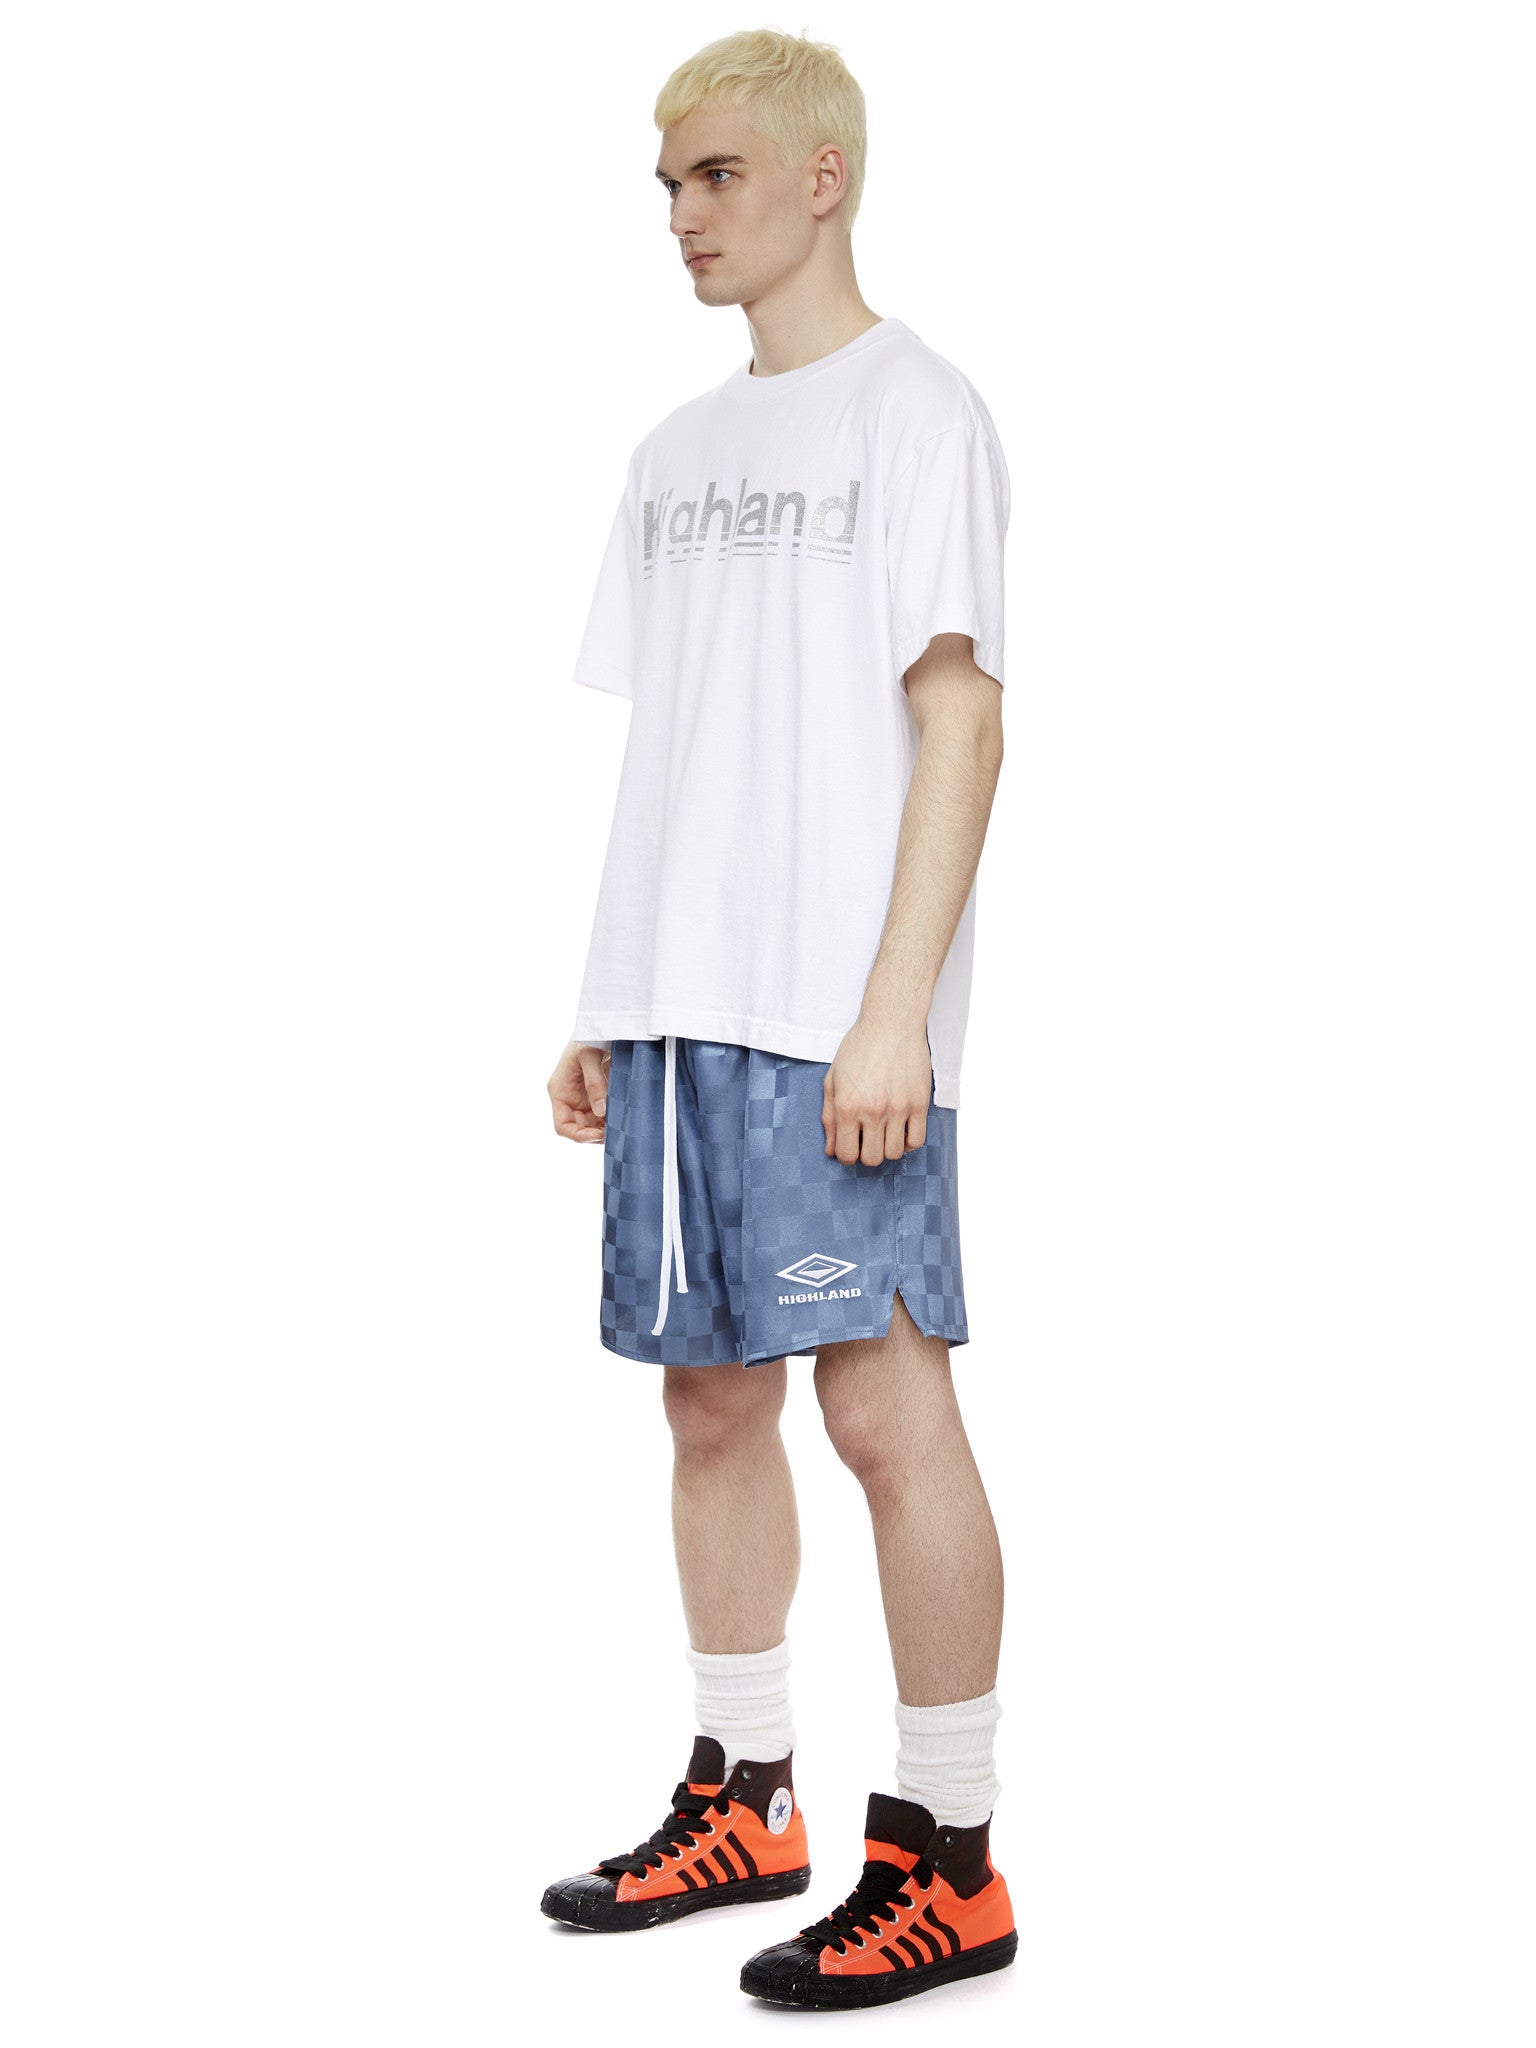 S/S Logo T-Shirt in White/Silver